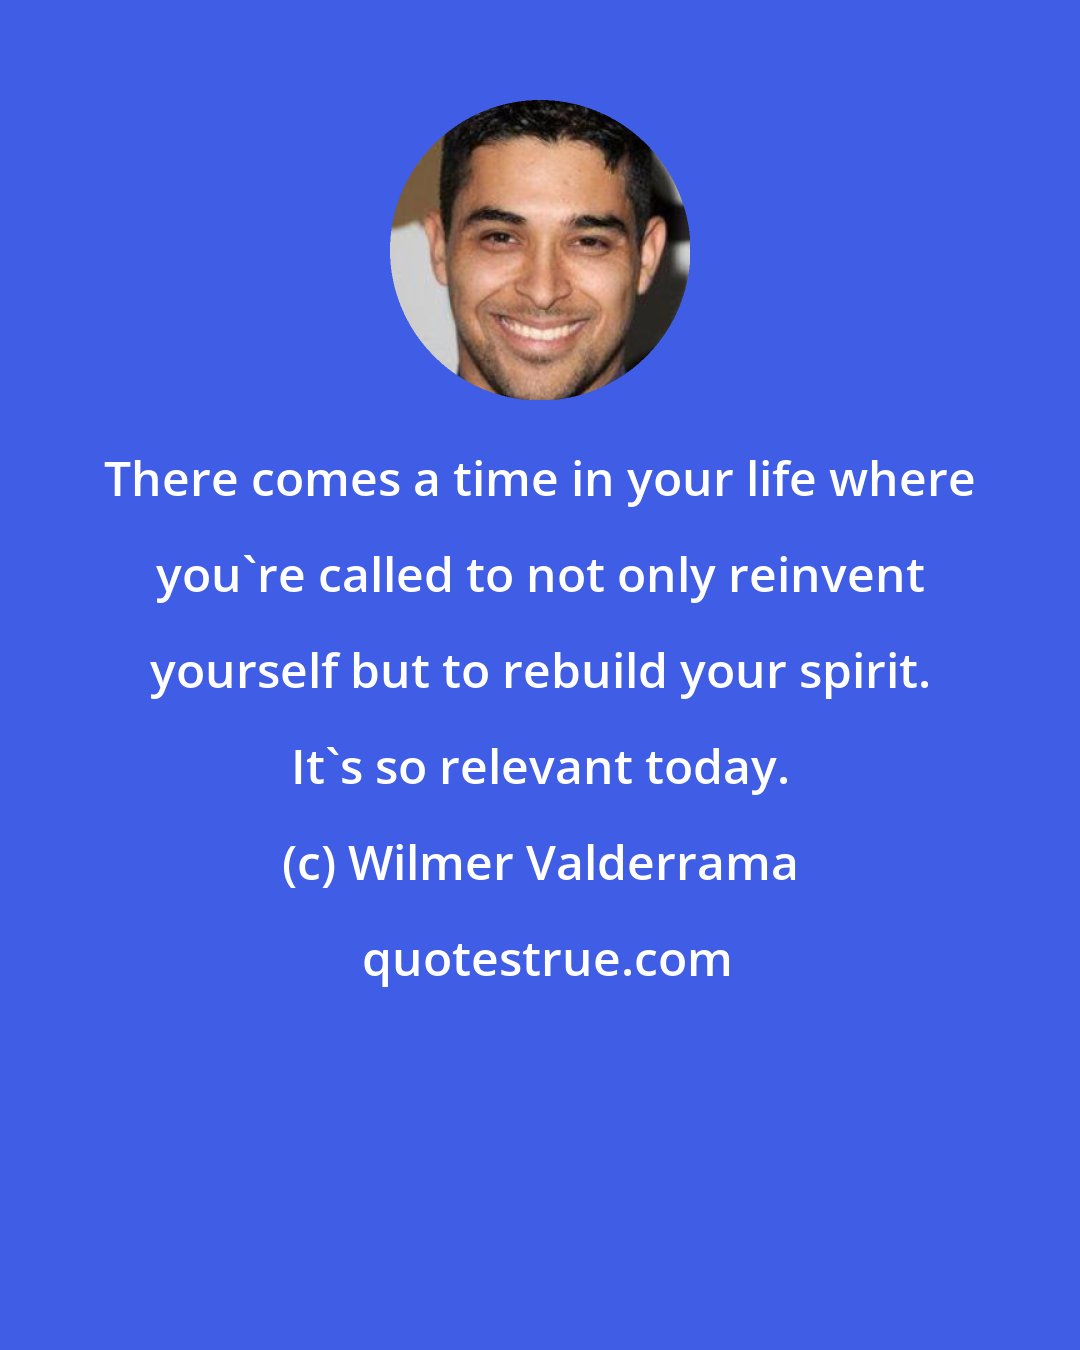 Wilmer Valderrama: There comes a time in your life where you're called to not only reinvent yourself but to rebuild your spirit. It's so relevant today.